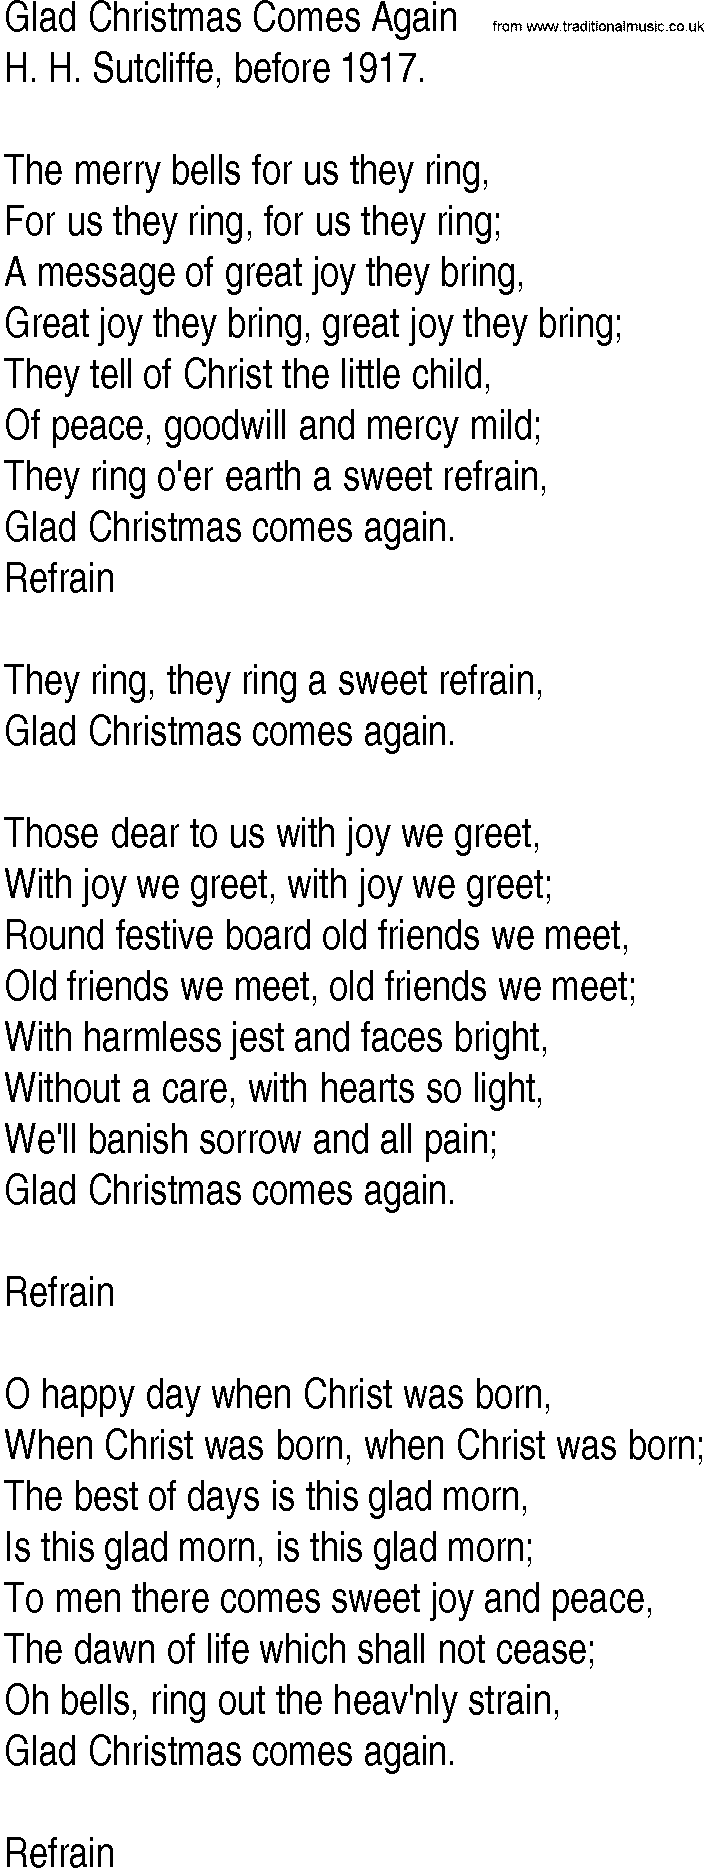 Hymn and Gospel Song: Glad Christmas Comes Again by H H Sutcliffe before lyrics